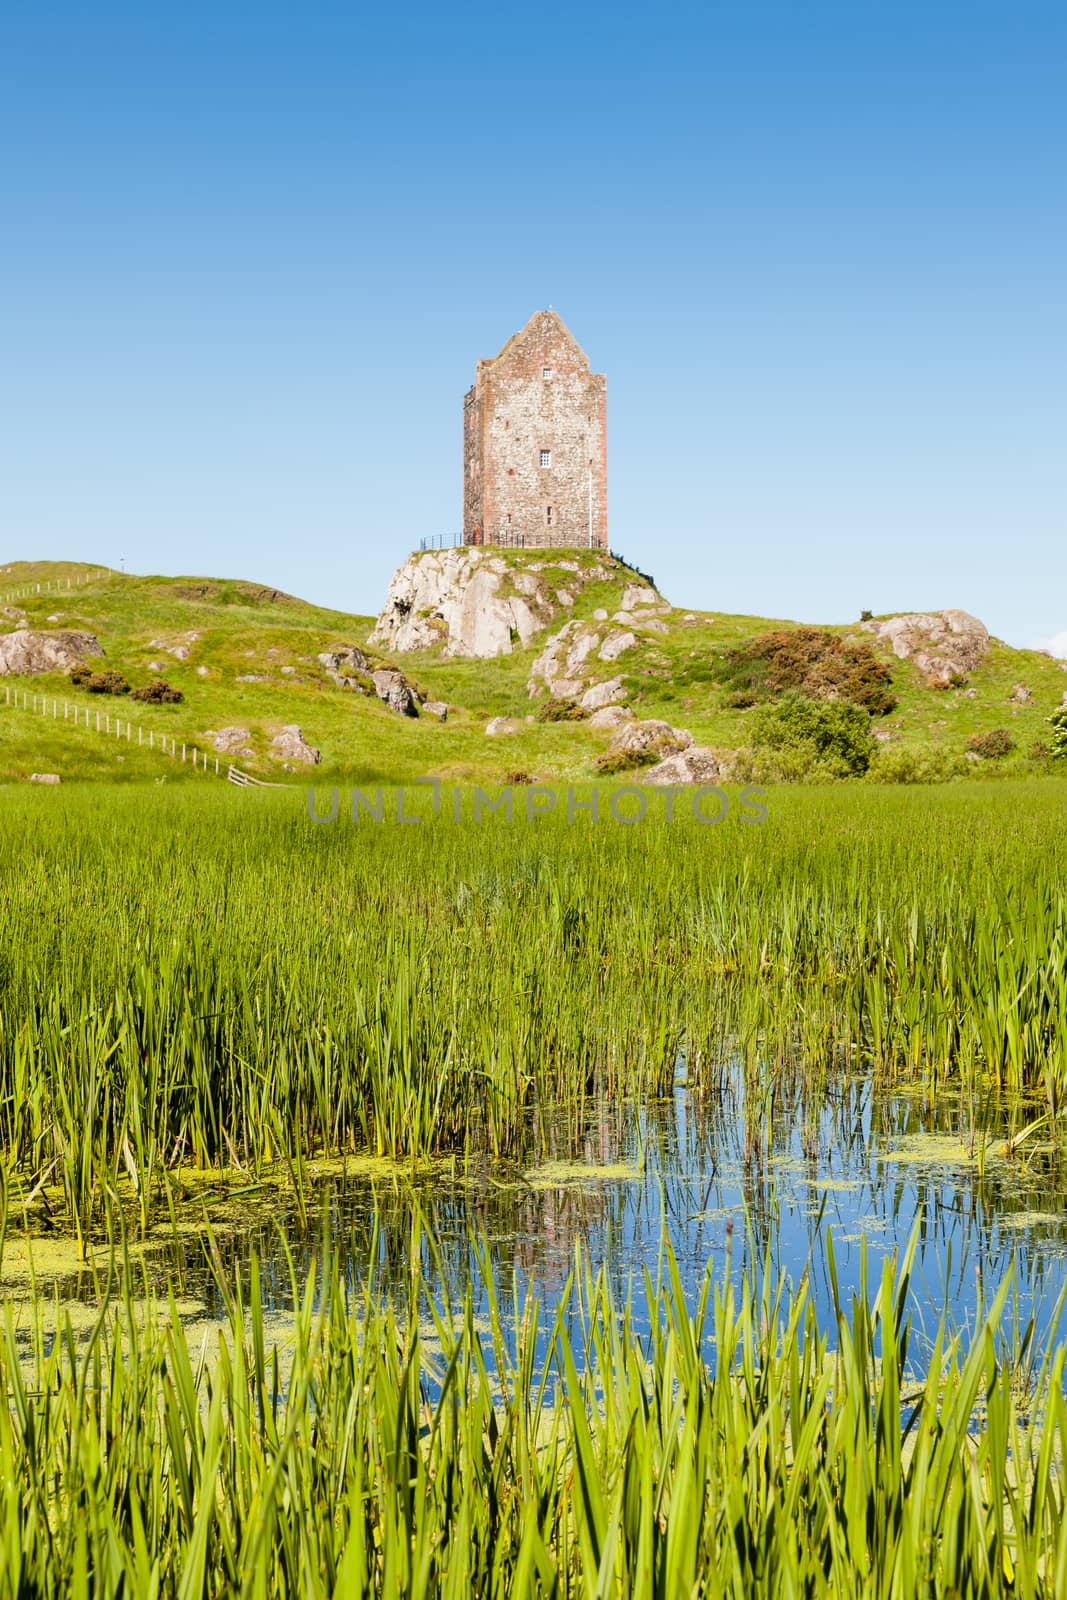 The view across a mill pond towards Smailholm Tower in the Scottish Borders.  The tower was built in the 1400's as protection from border raiders and the elements.